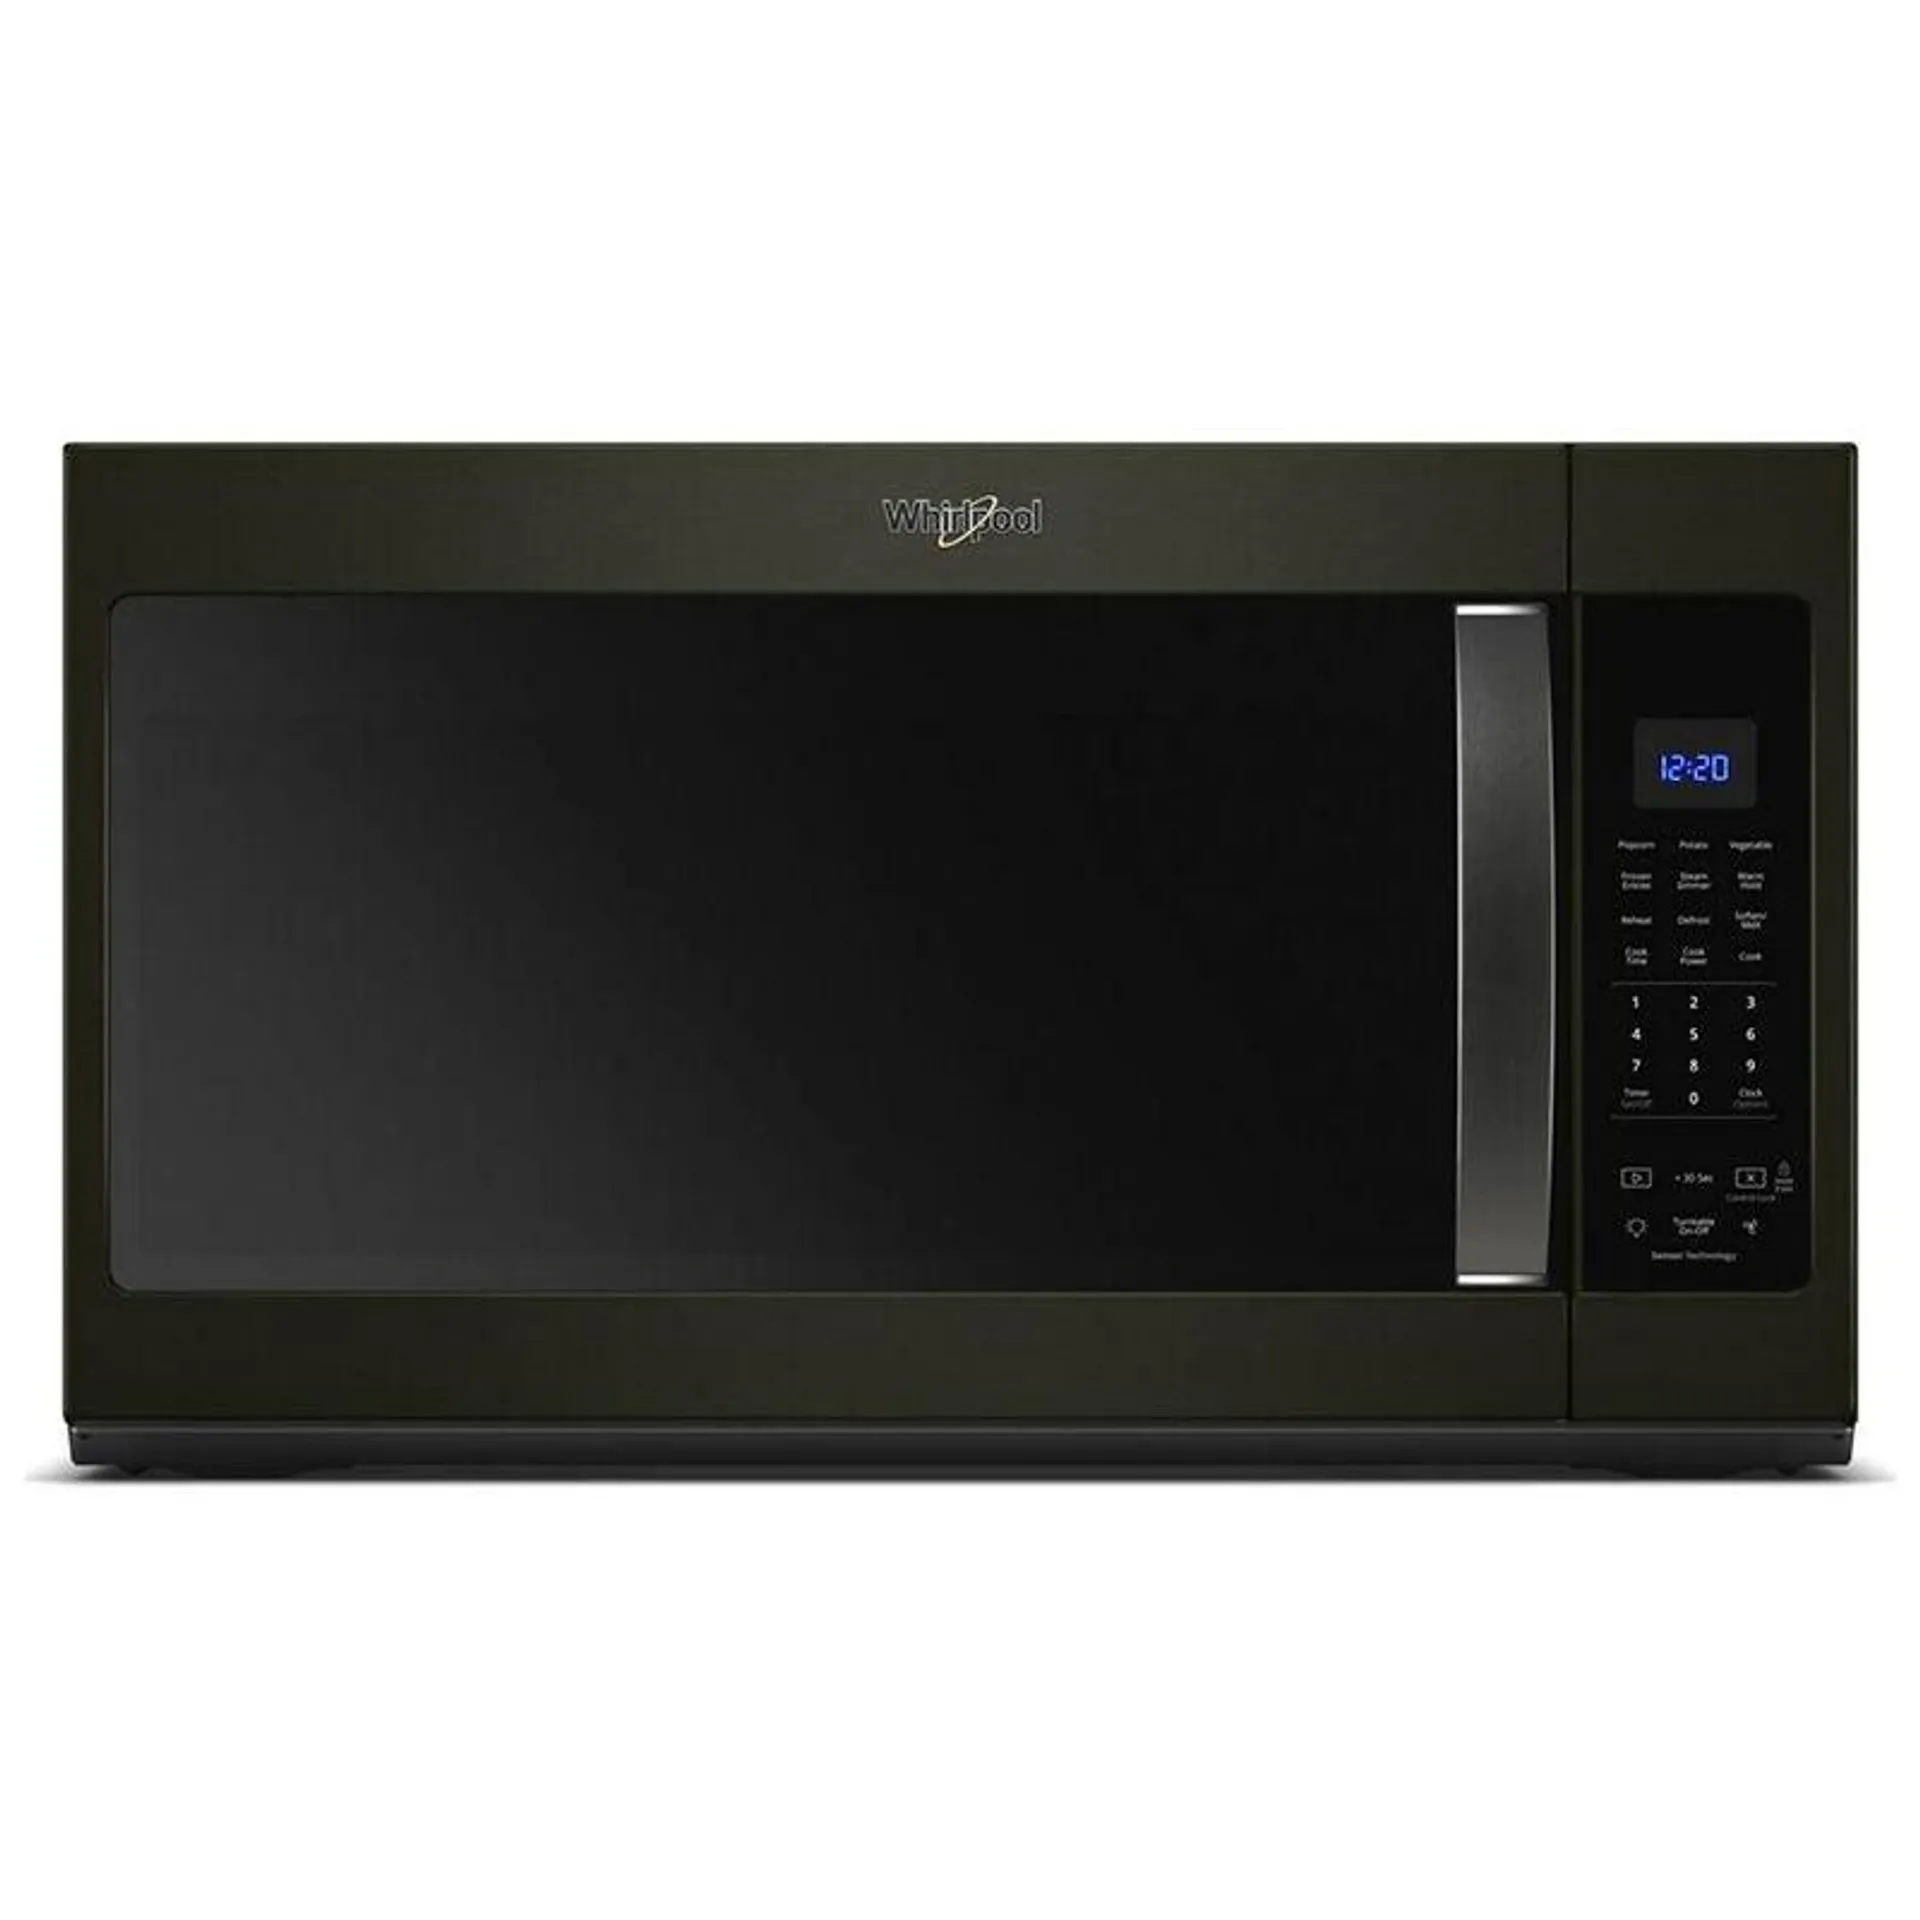 Whirlpool 30" 1.9 Cu. Ft. Over-the-Range Microwave with 10 Power Levels, 300 CFM & Sensor Cooking Controls - Fingerprint Resistant Black Stainless